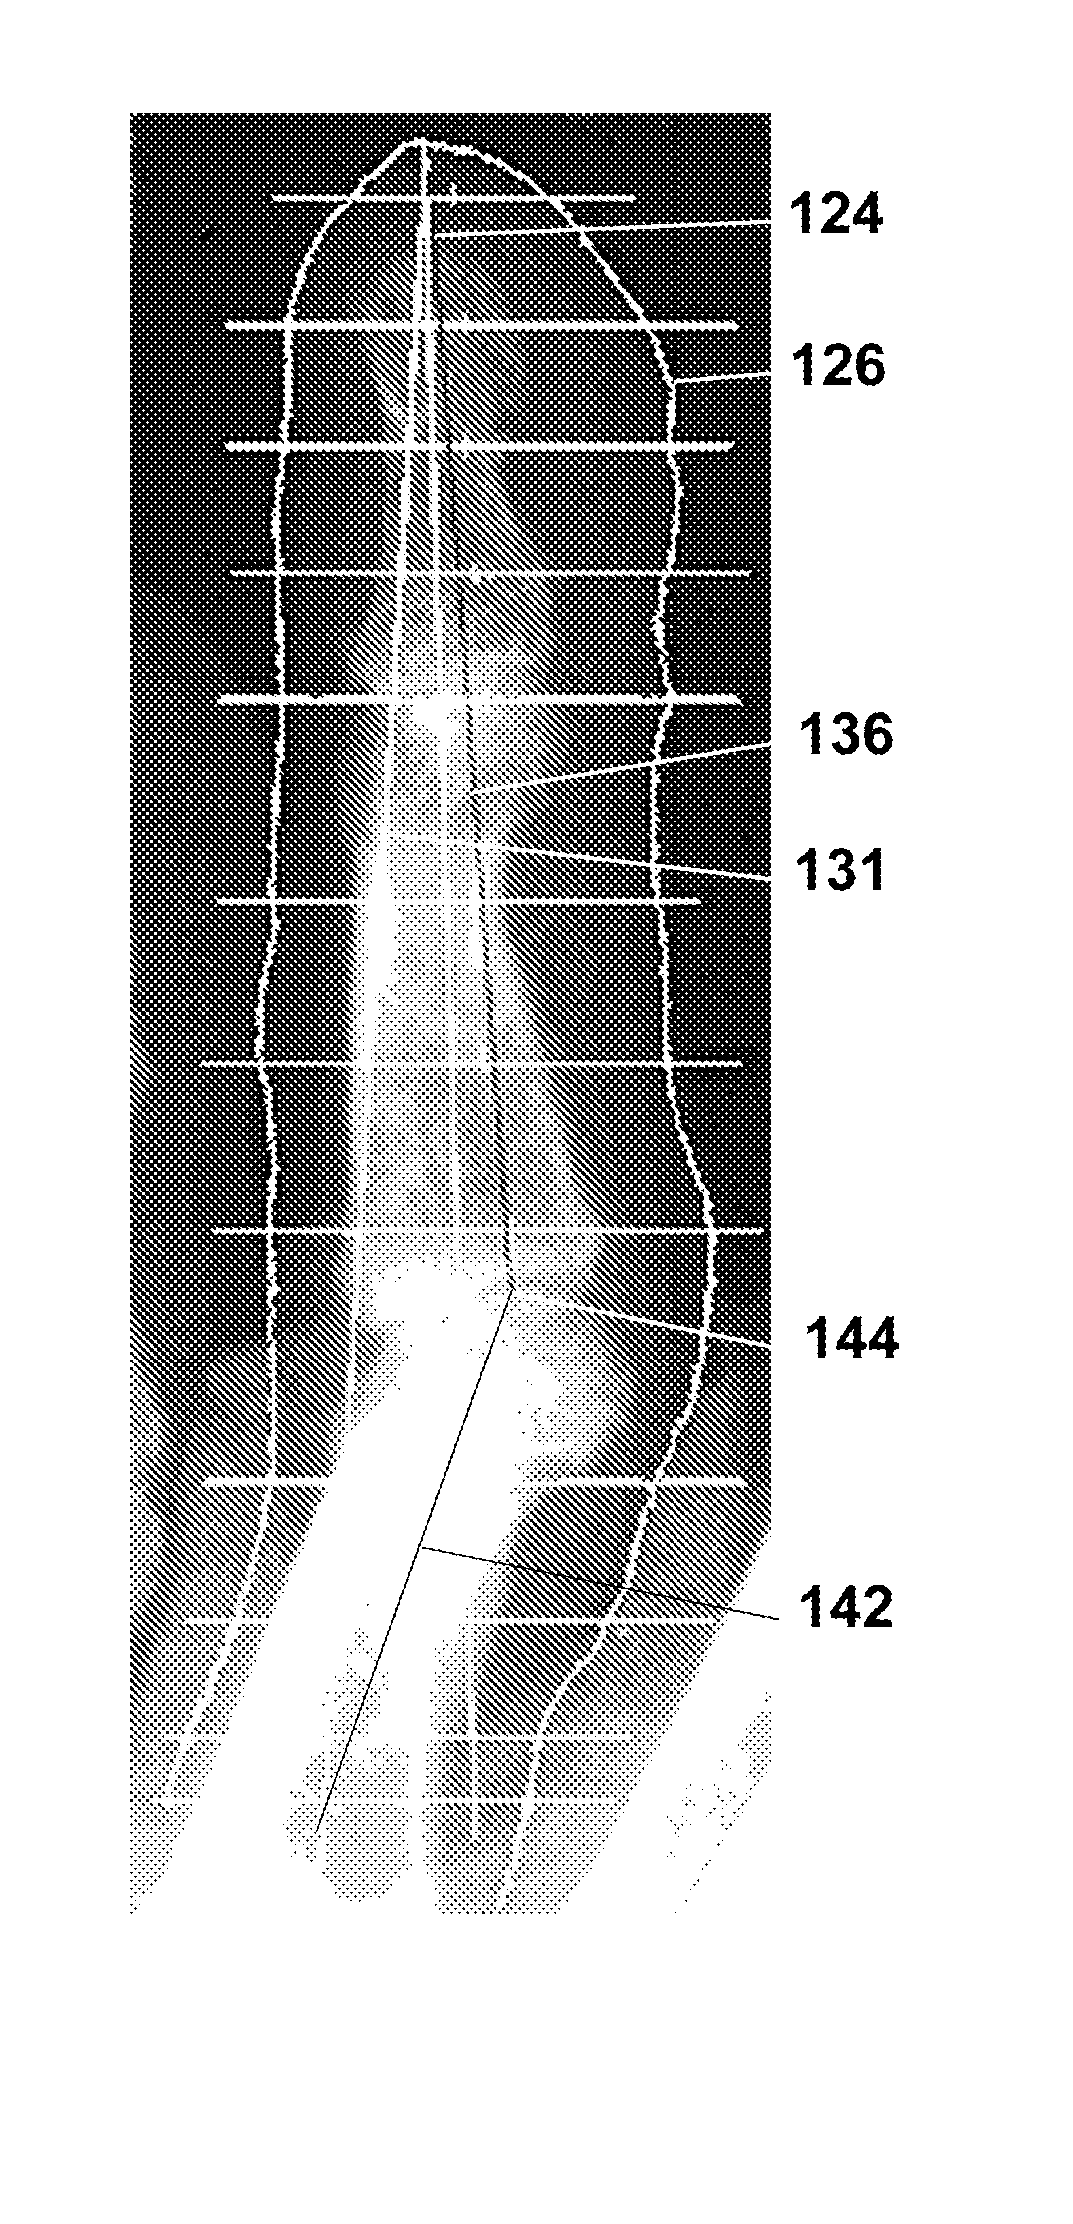 Method, code, and system for assaying joint deformity